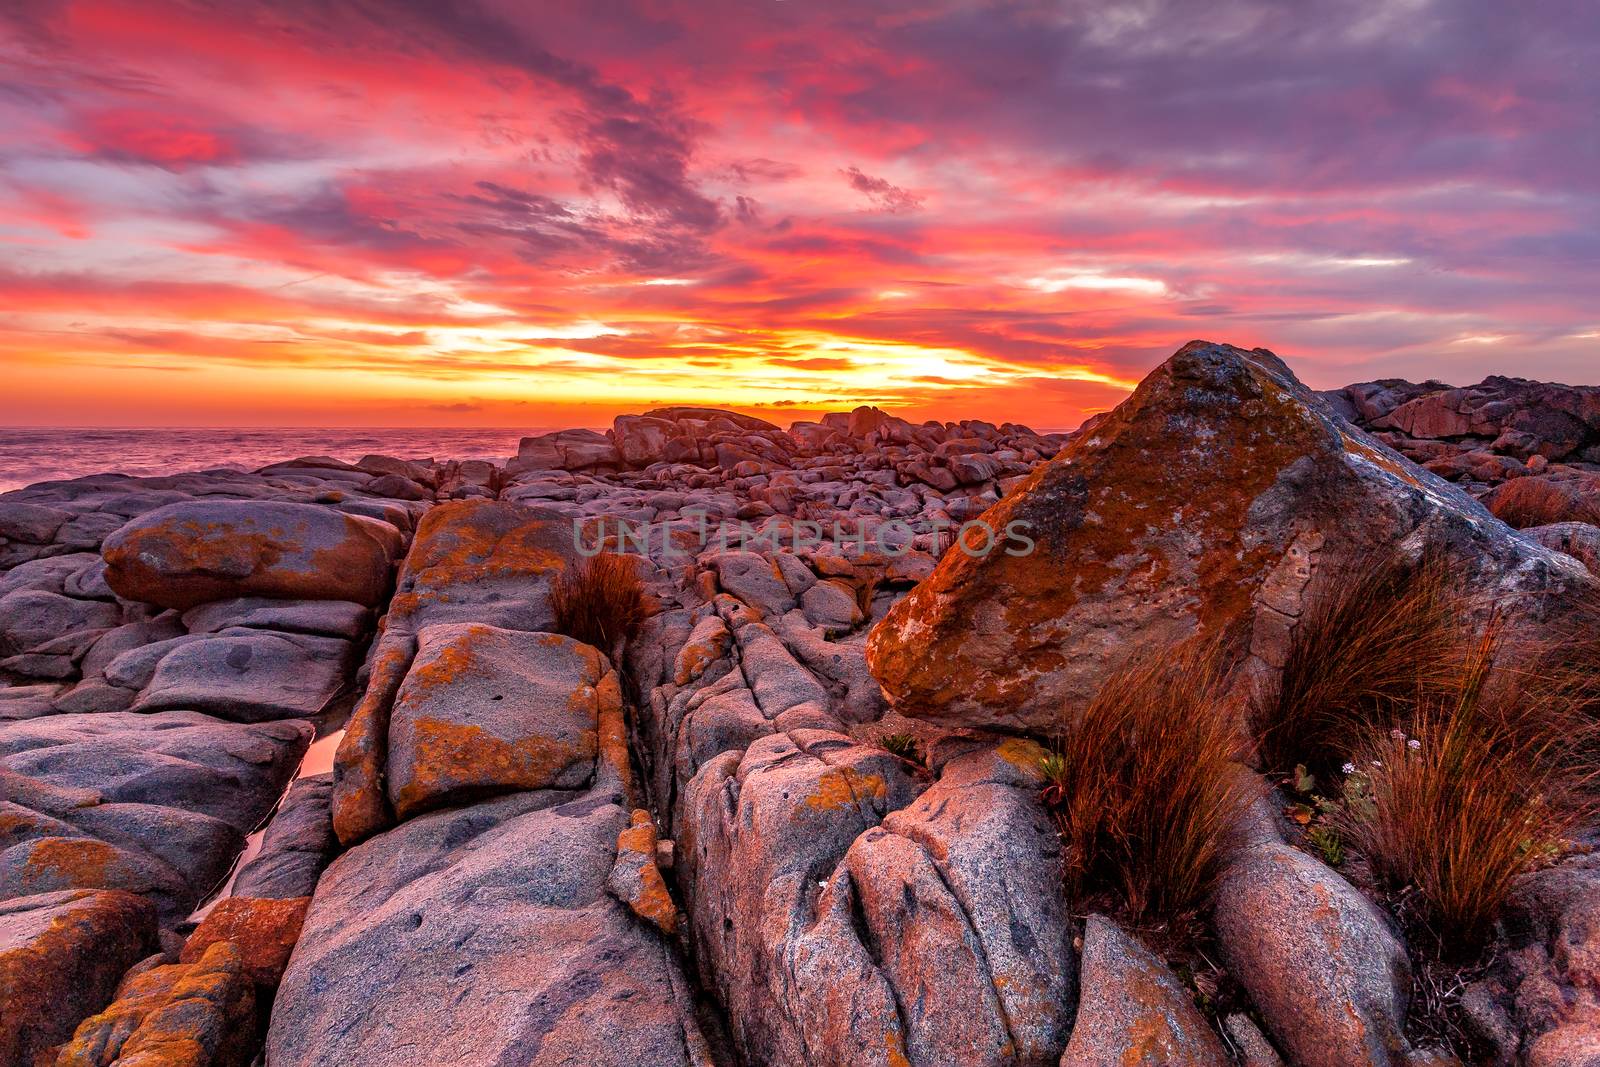 Rich red sunrise over the rocky coast Australia by lovleah